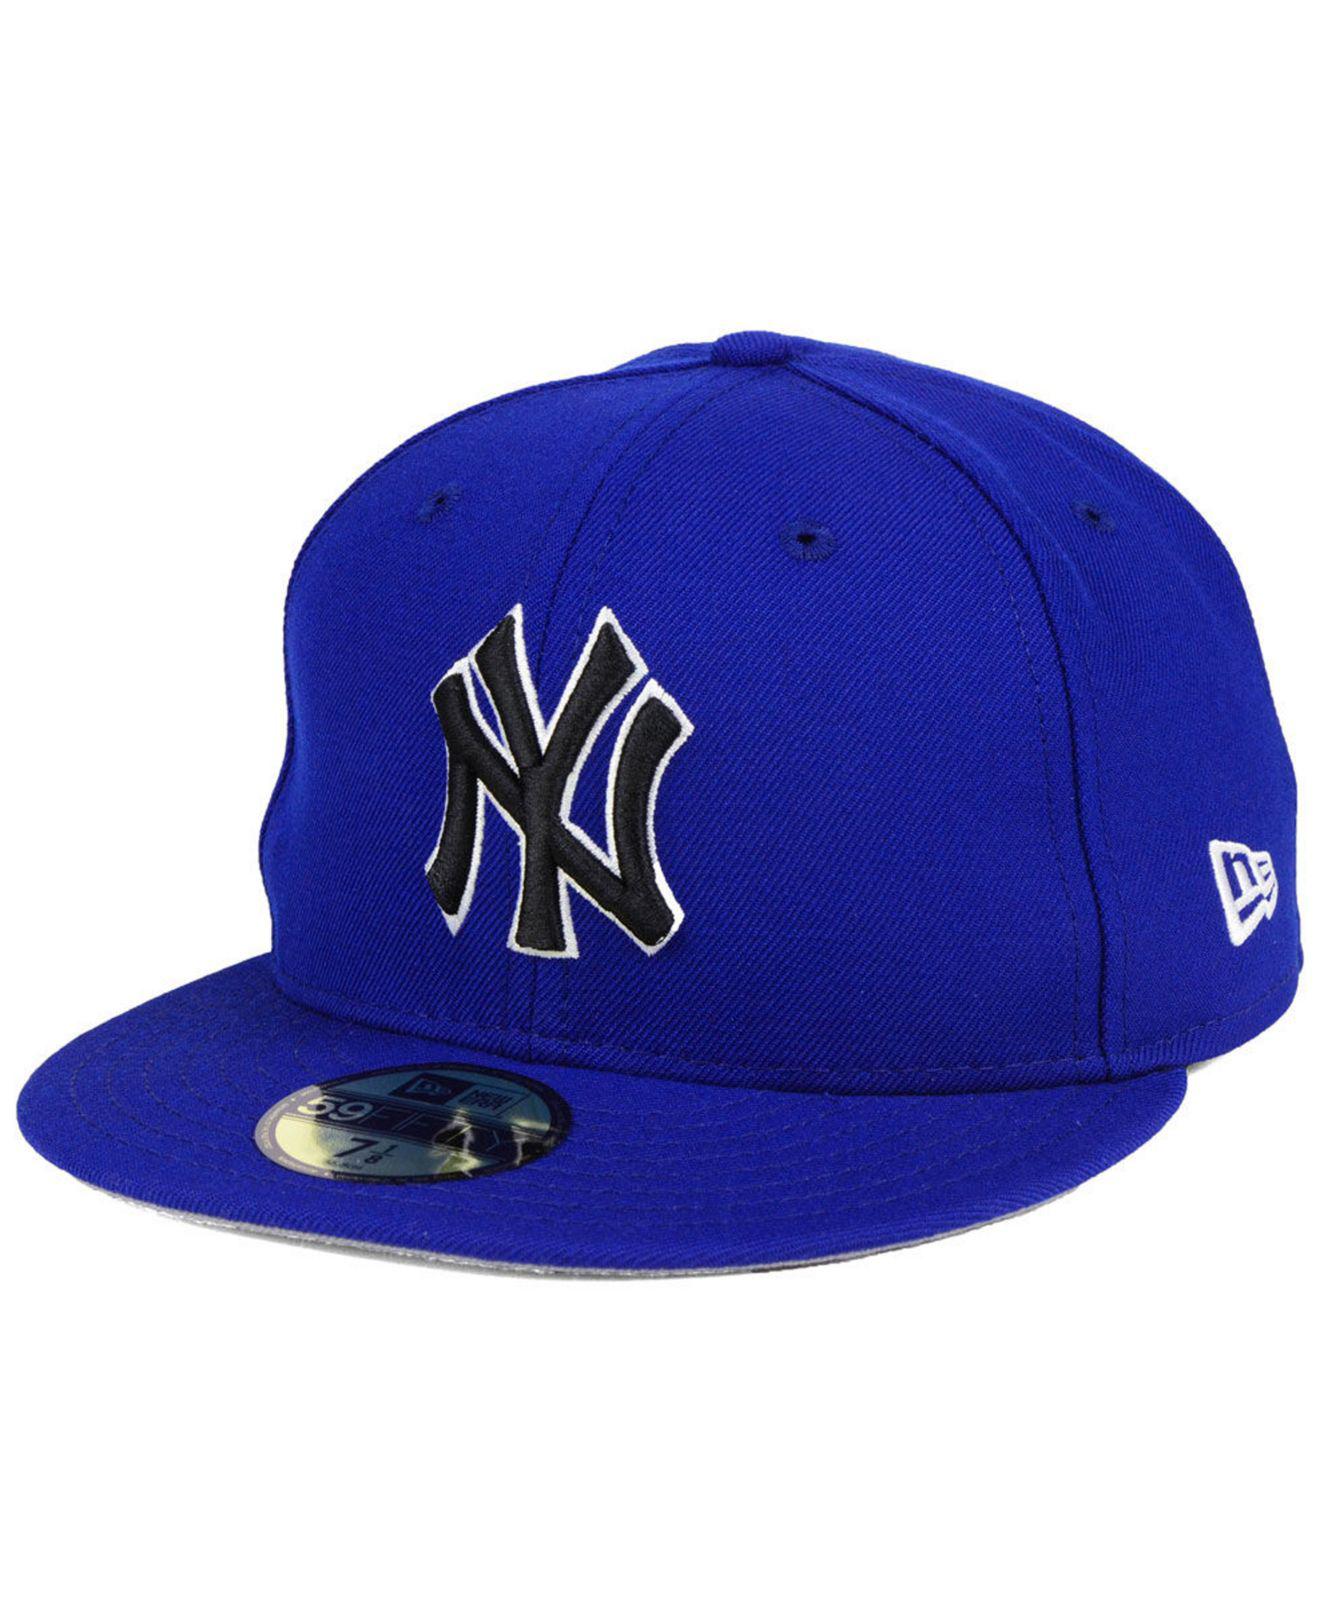 KTZ New York Yankees Royal Pack 59fifty Fitted Cap in Blue for Men